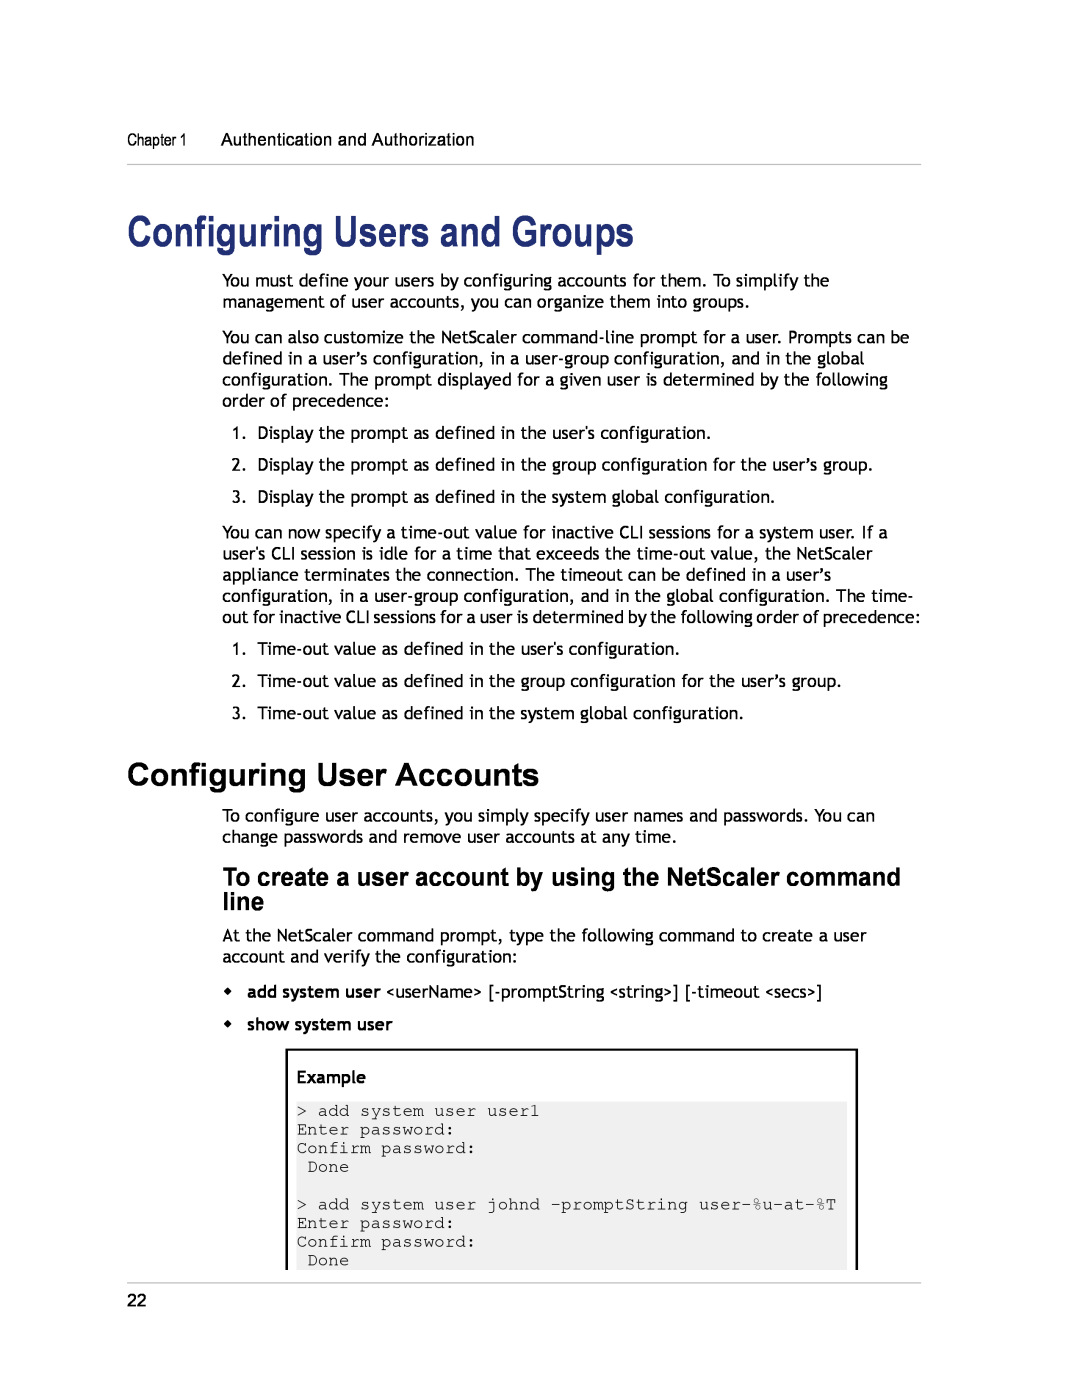 Citrix Systems CITRIX NETSCALER 9.3 Configuring Users and Groups, Configuring User Accounts, w show system user Example 